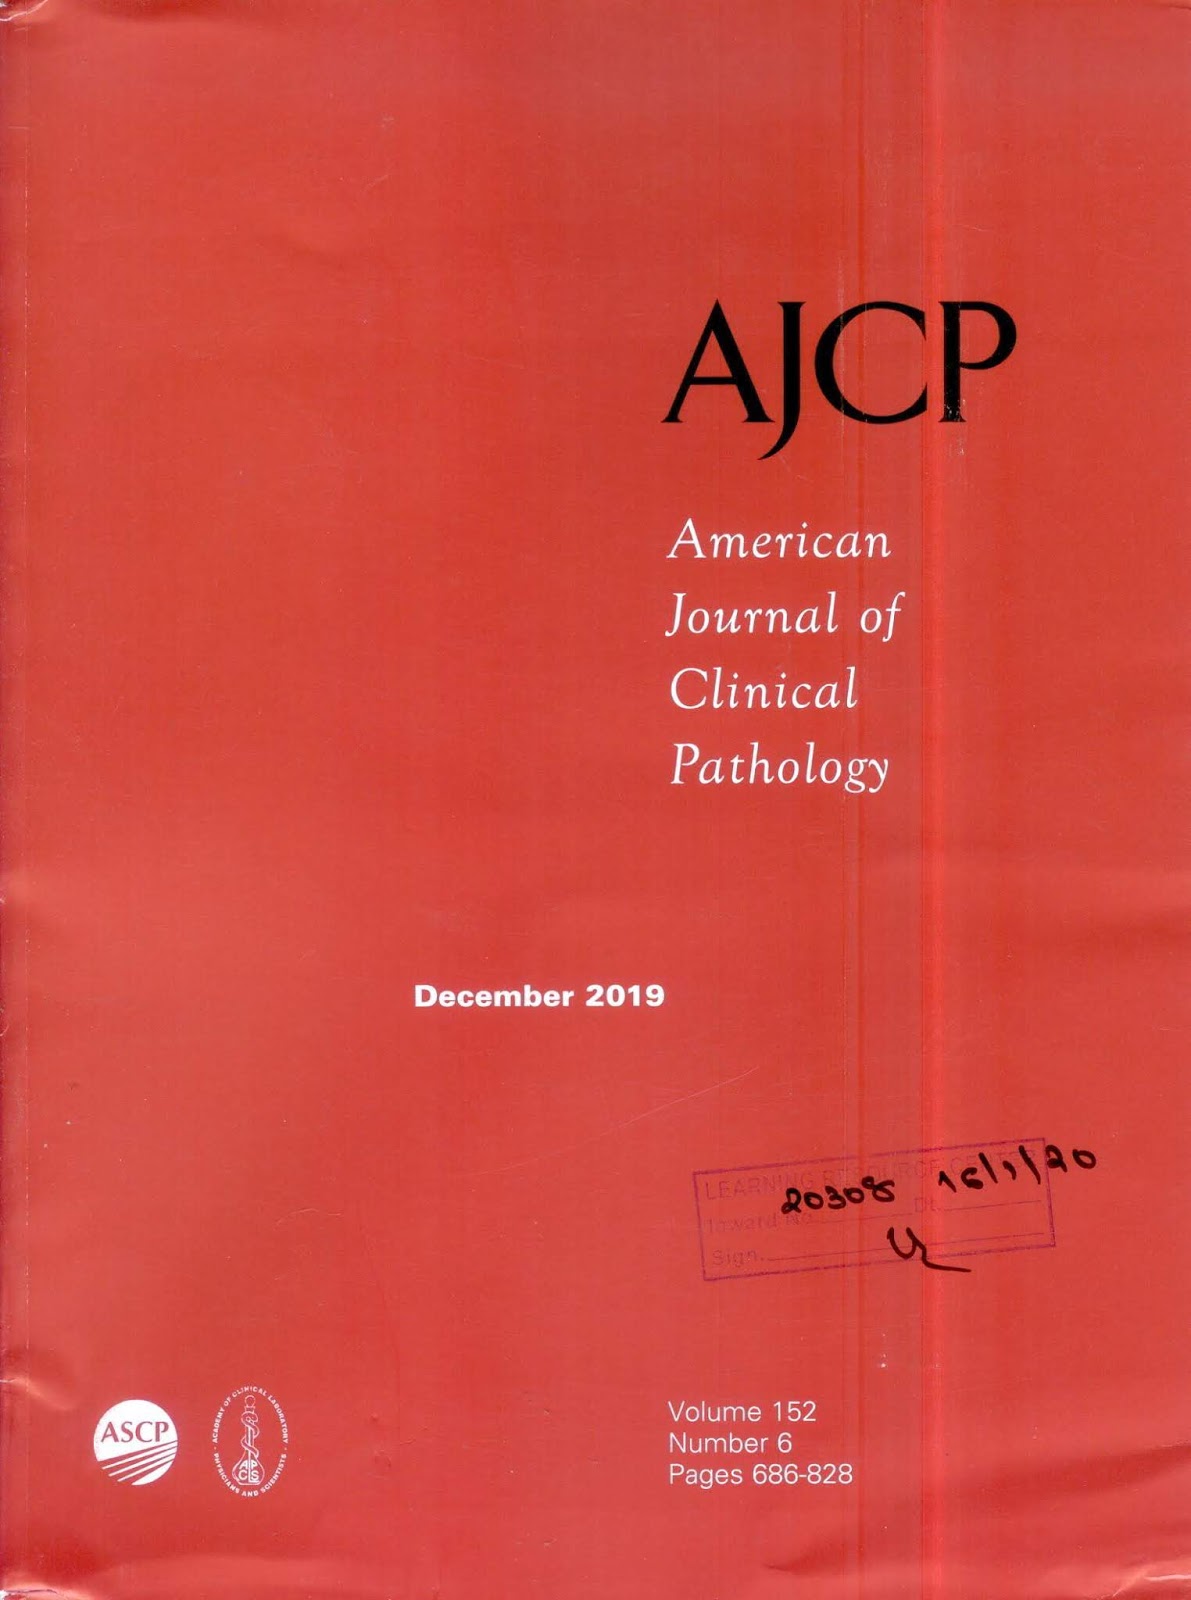 https://academic.oup.com/ajcp/issue/152/6